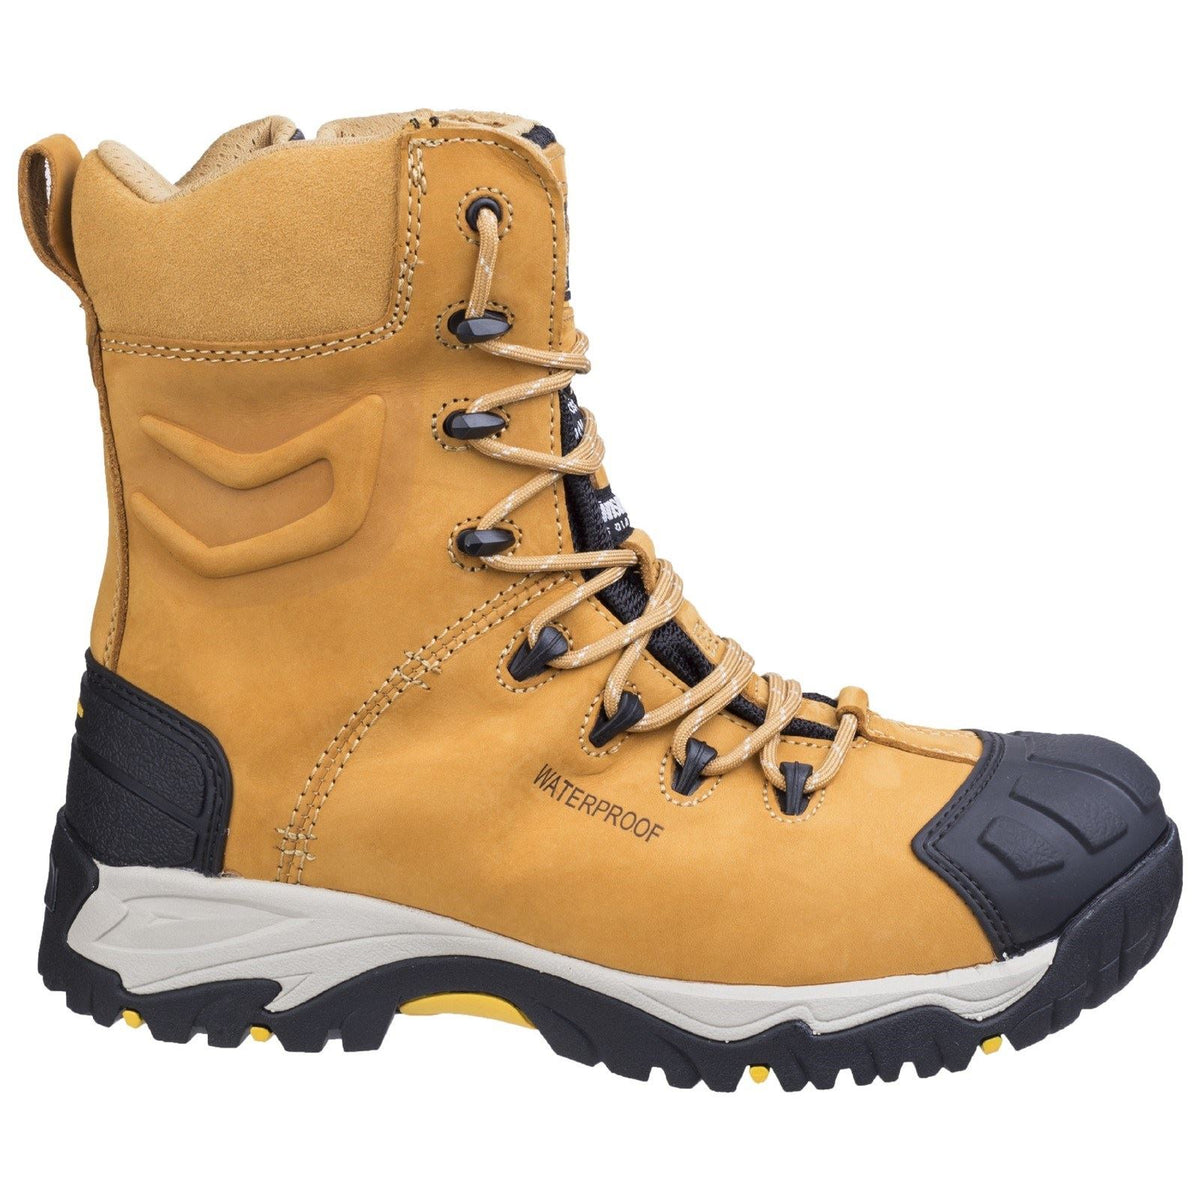 Amblers Safety FS998 Safety Boots